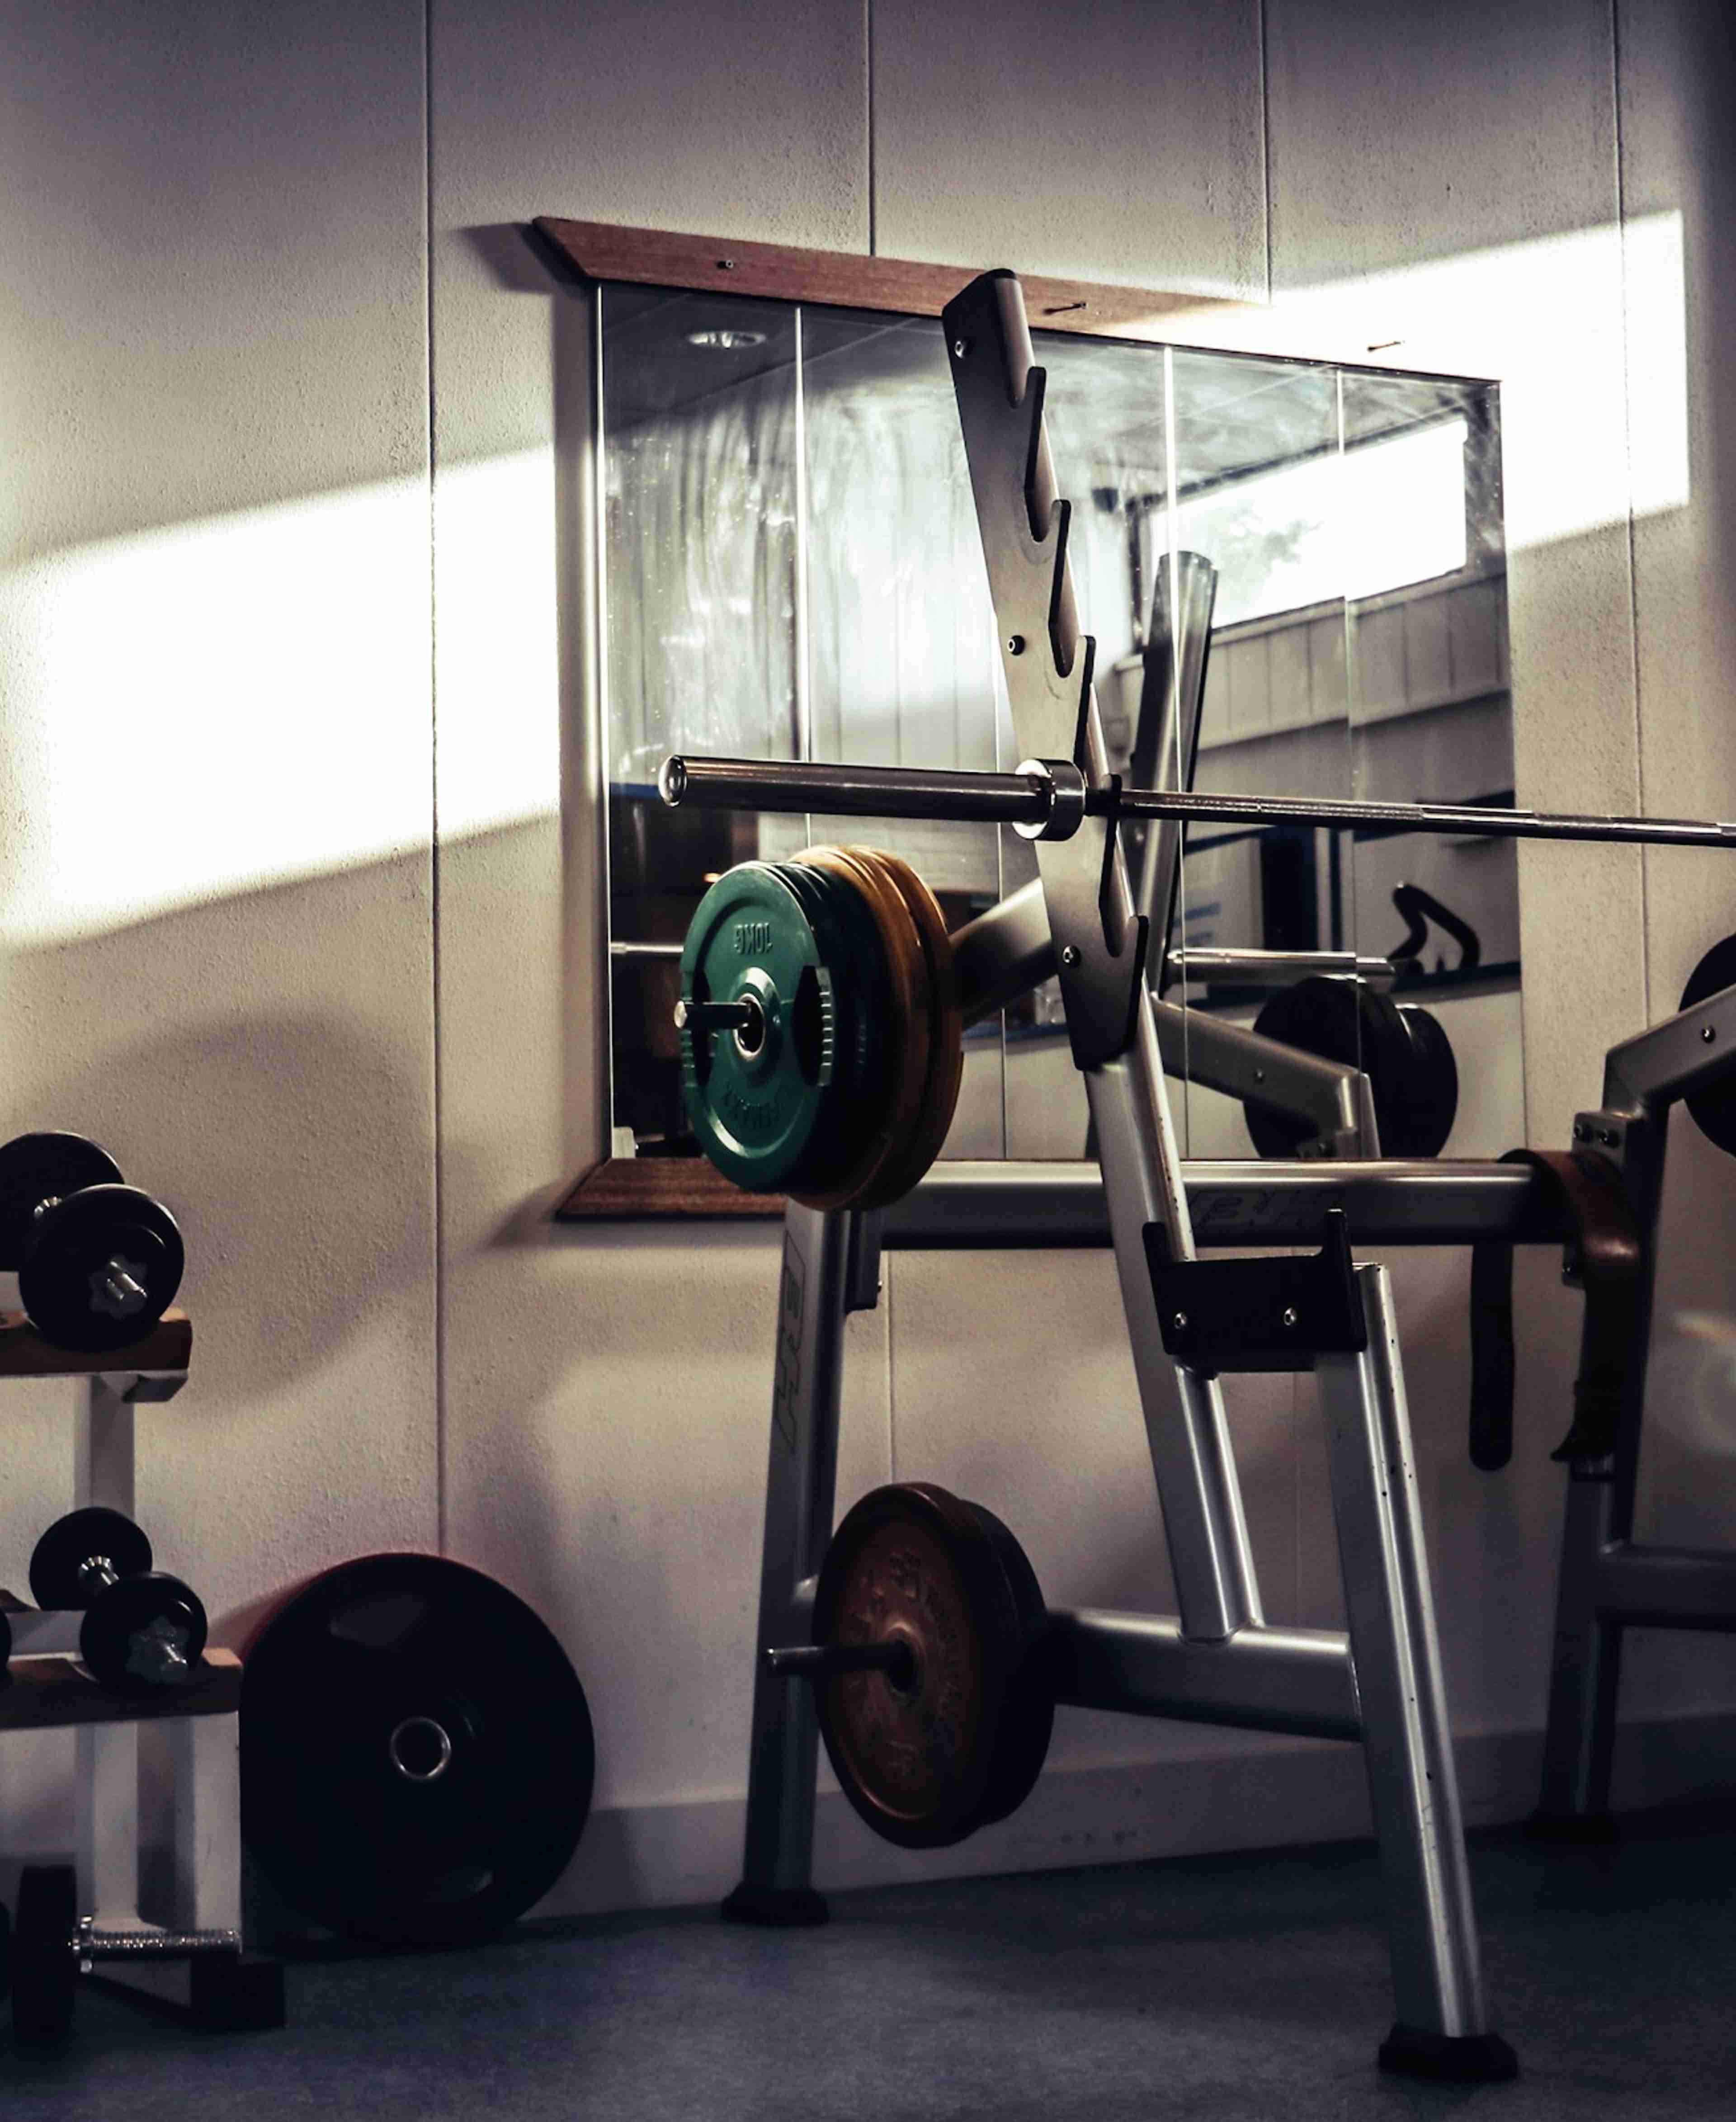 An indoor gym with sunlight streaming through a window onto weightlifting equipment